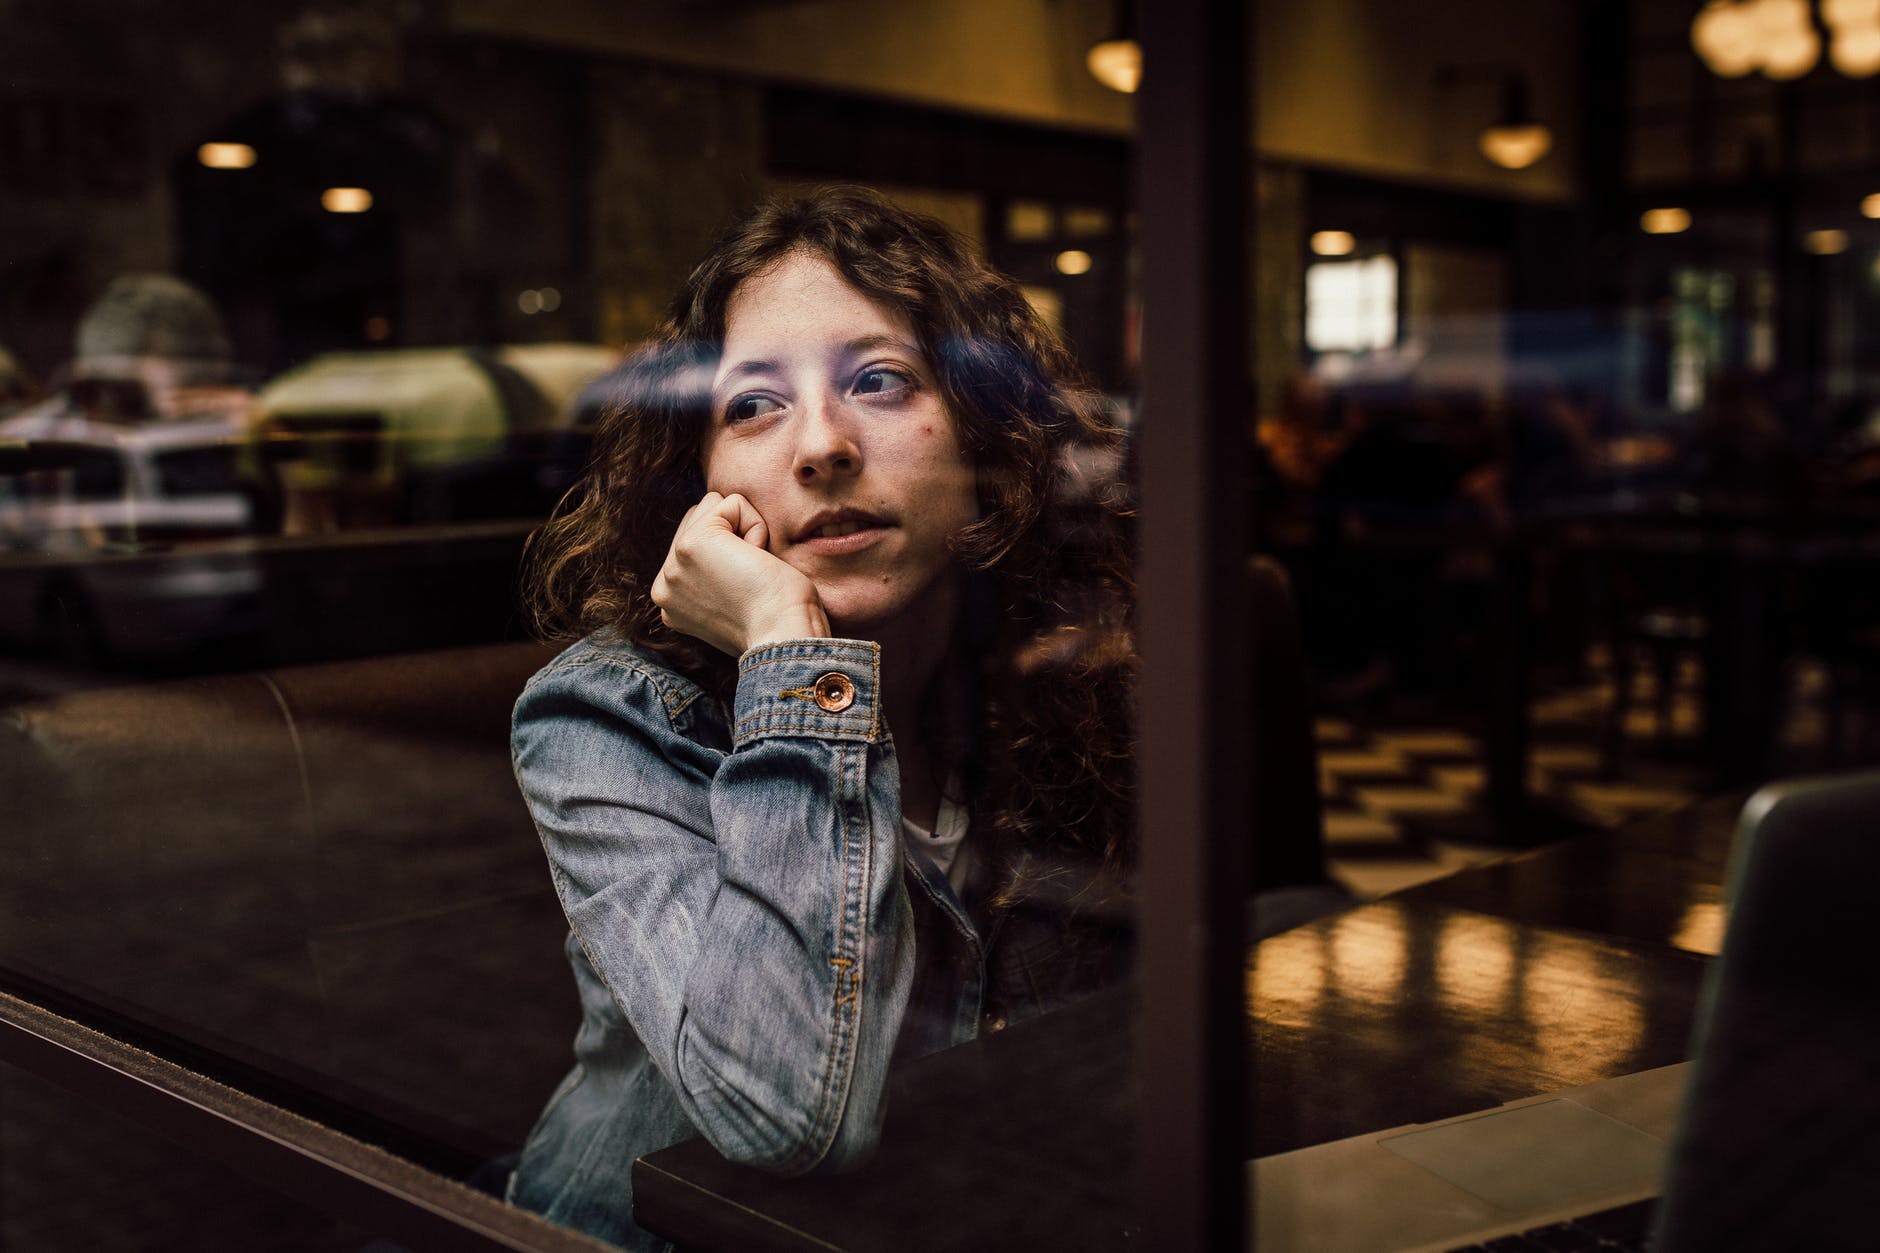 A woman waiting in a restaurant.